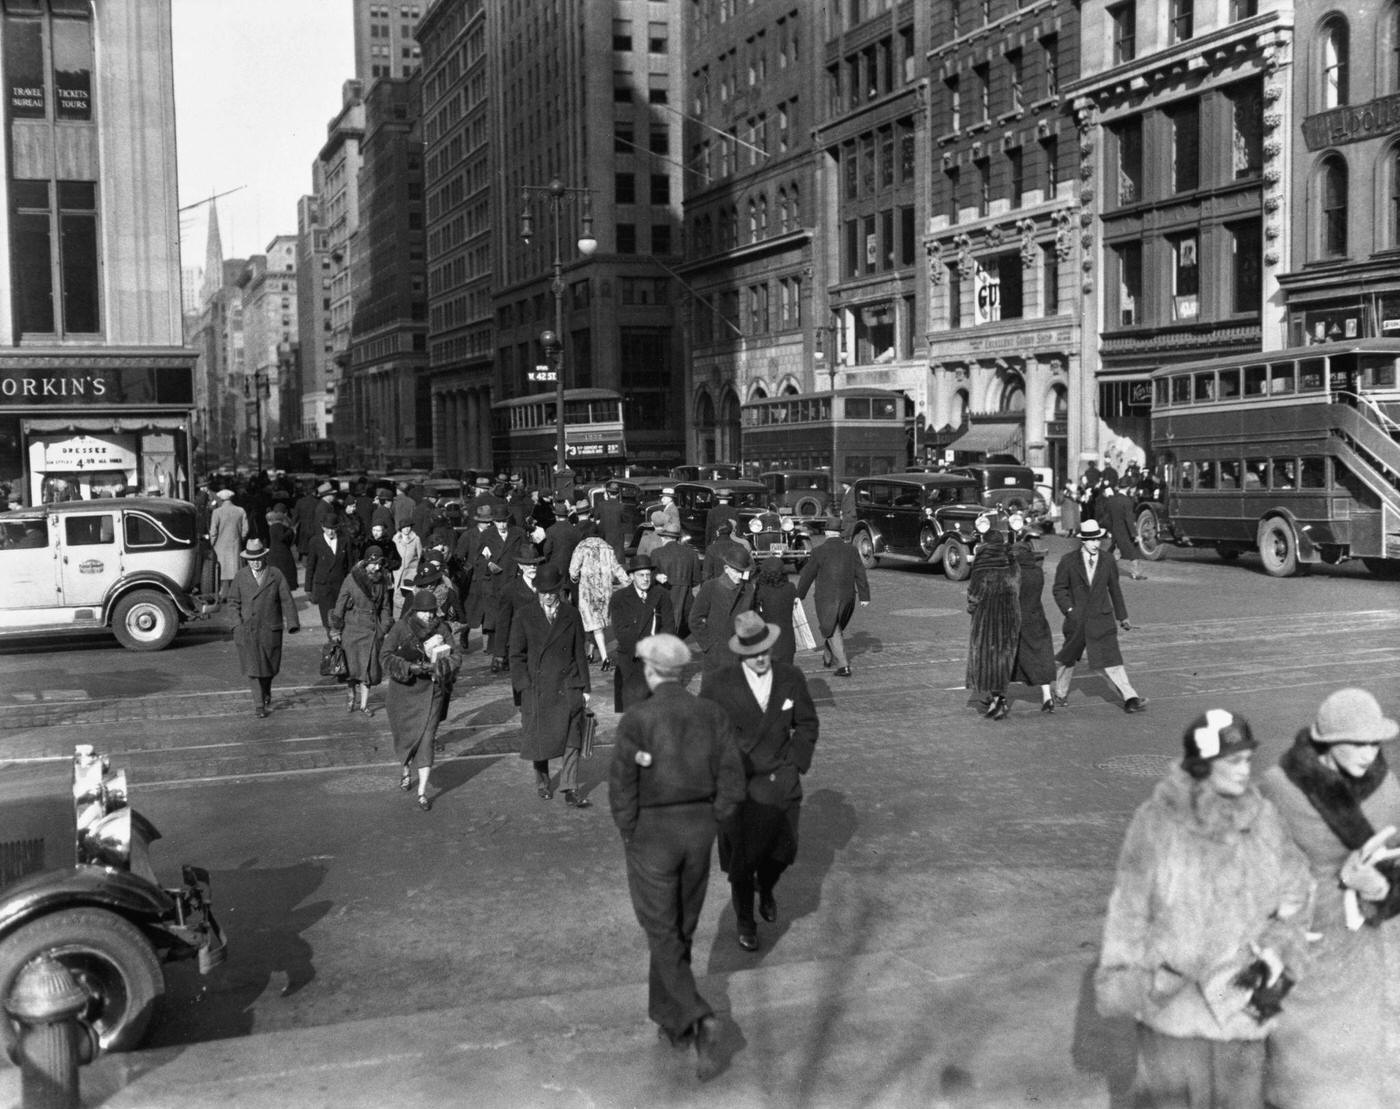 Shopping Crowds At Fifth Avenue And 42Nd Street During The Emergency Banking Act Four-Day Bank Holiday, Manhattan, 1933